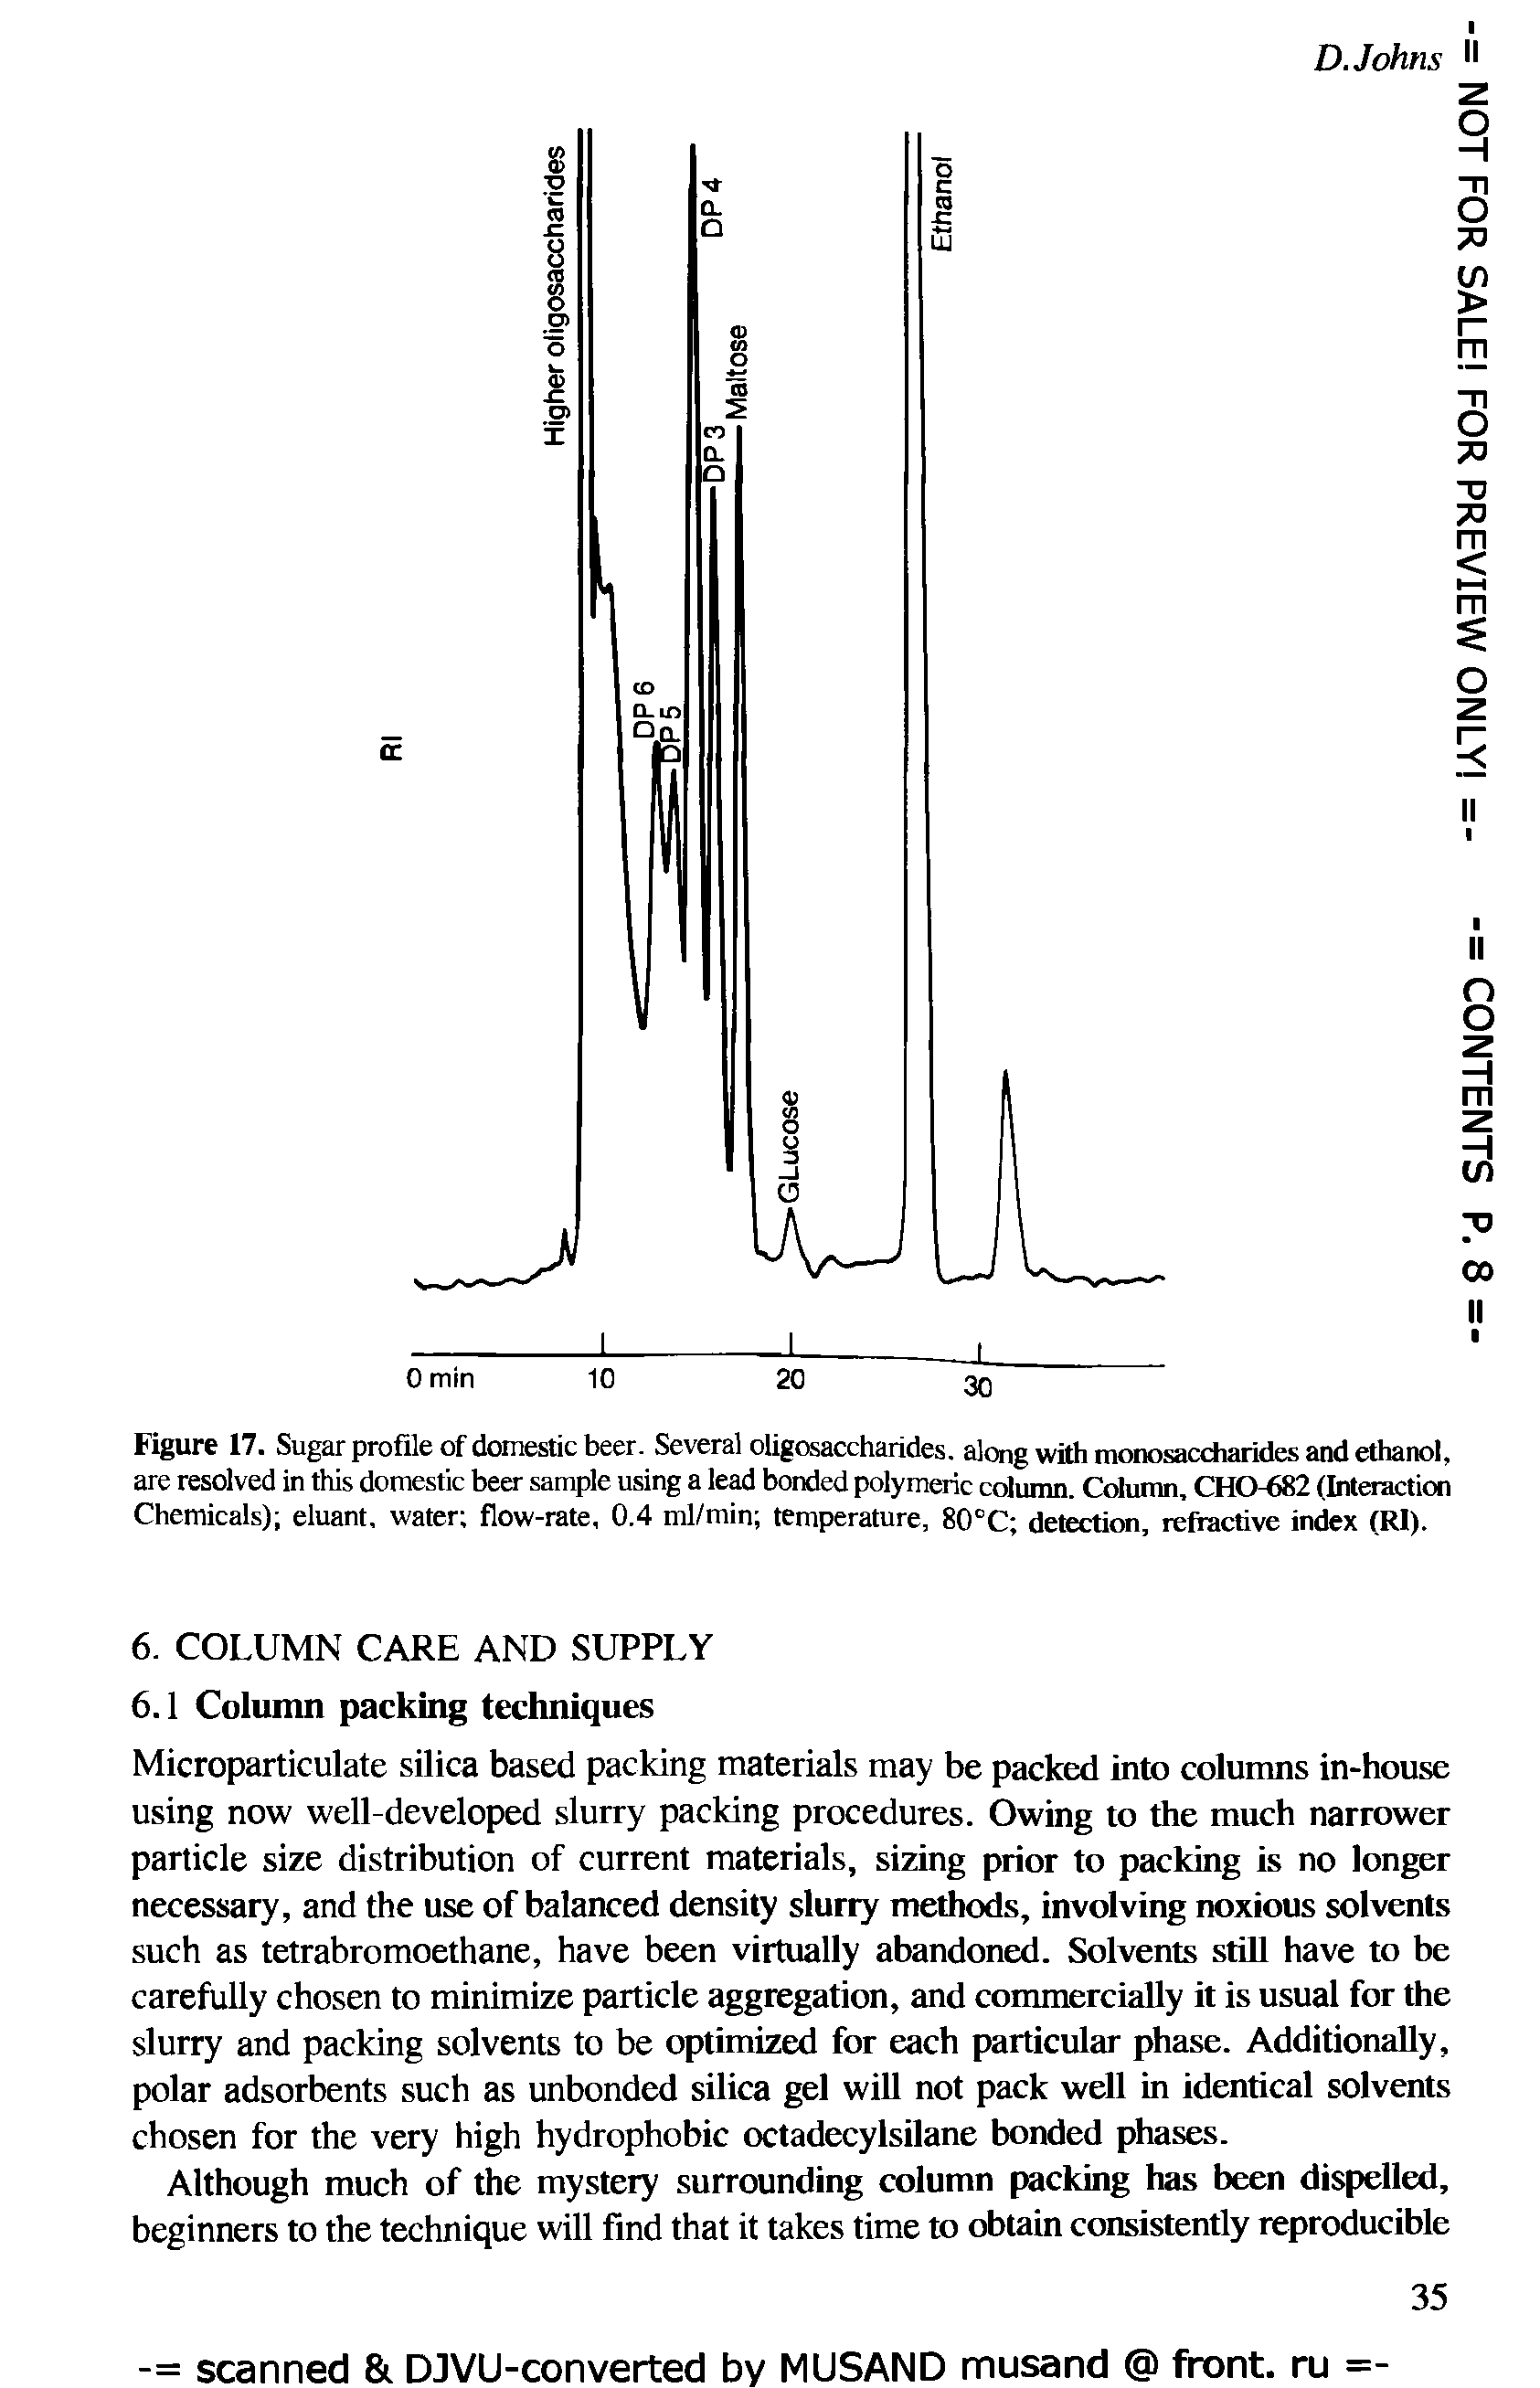 Figure 17. Sugar profile of domestic beer. Several oligosaccharides, along with monosaccharides and ethanol, are resolved in this domestic beer sample using a lead bonded polymeric colunin. Column, CHO-682 (Interaction Chemicals) eluant, water flow-rate, 0.4 ml/min temperature, SO C detection, refractive index (RI).